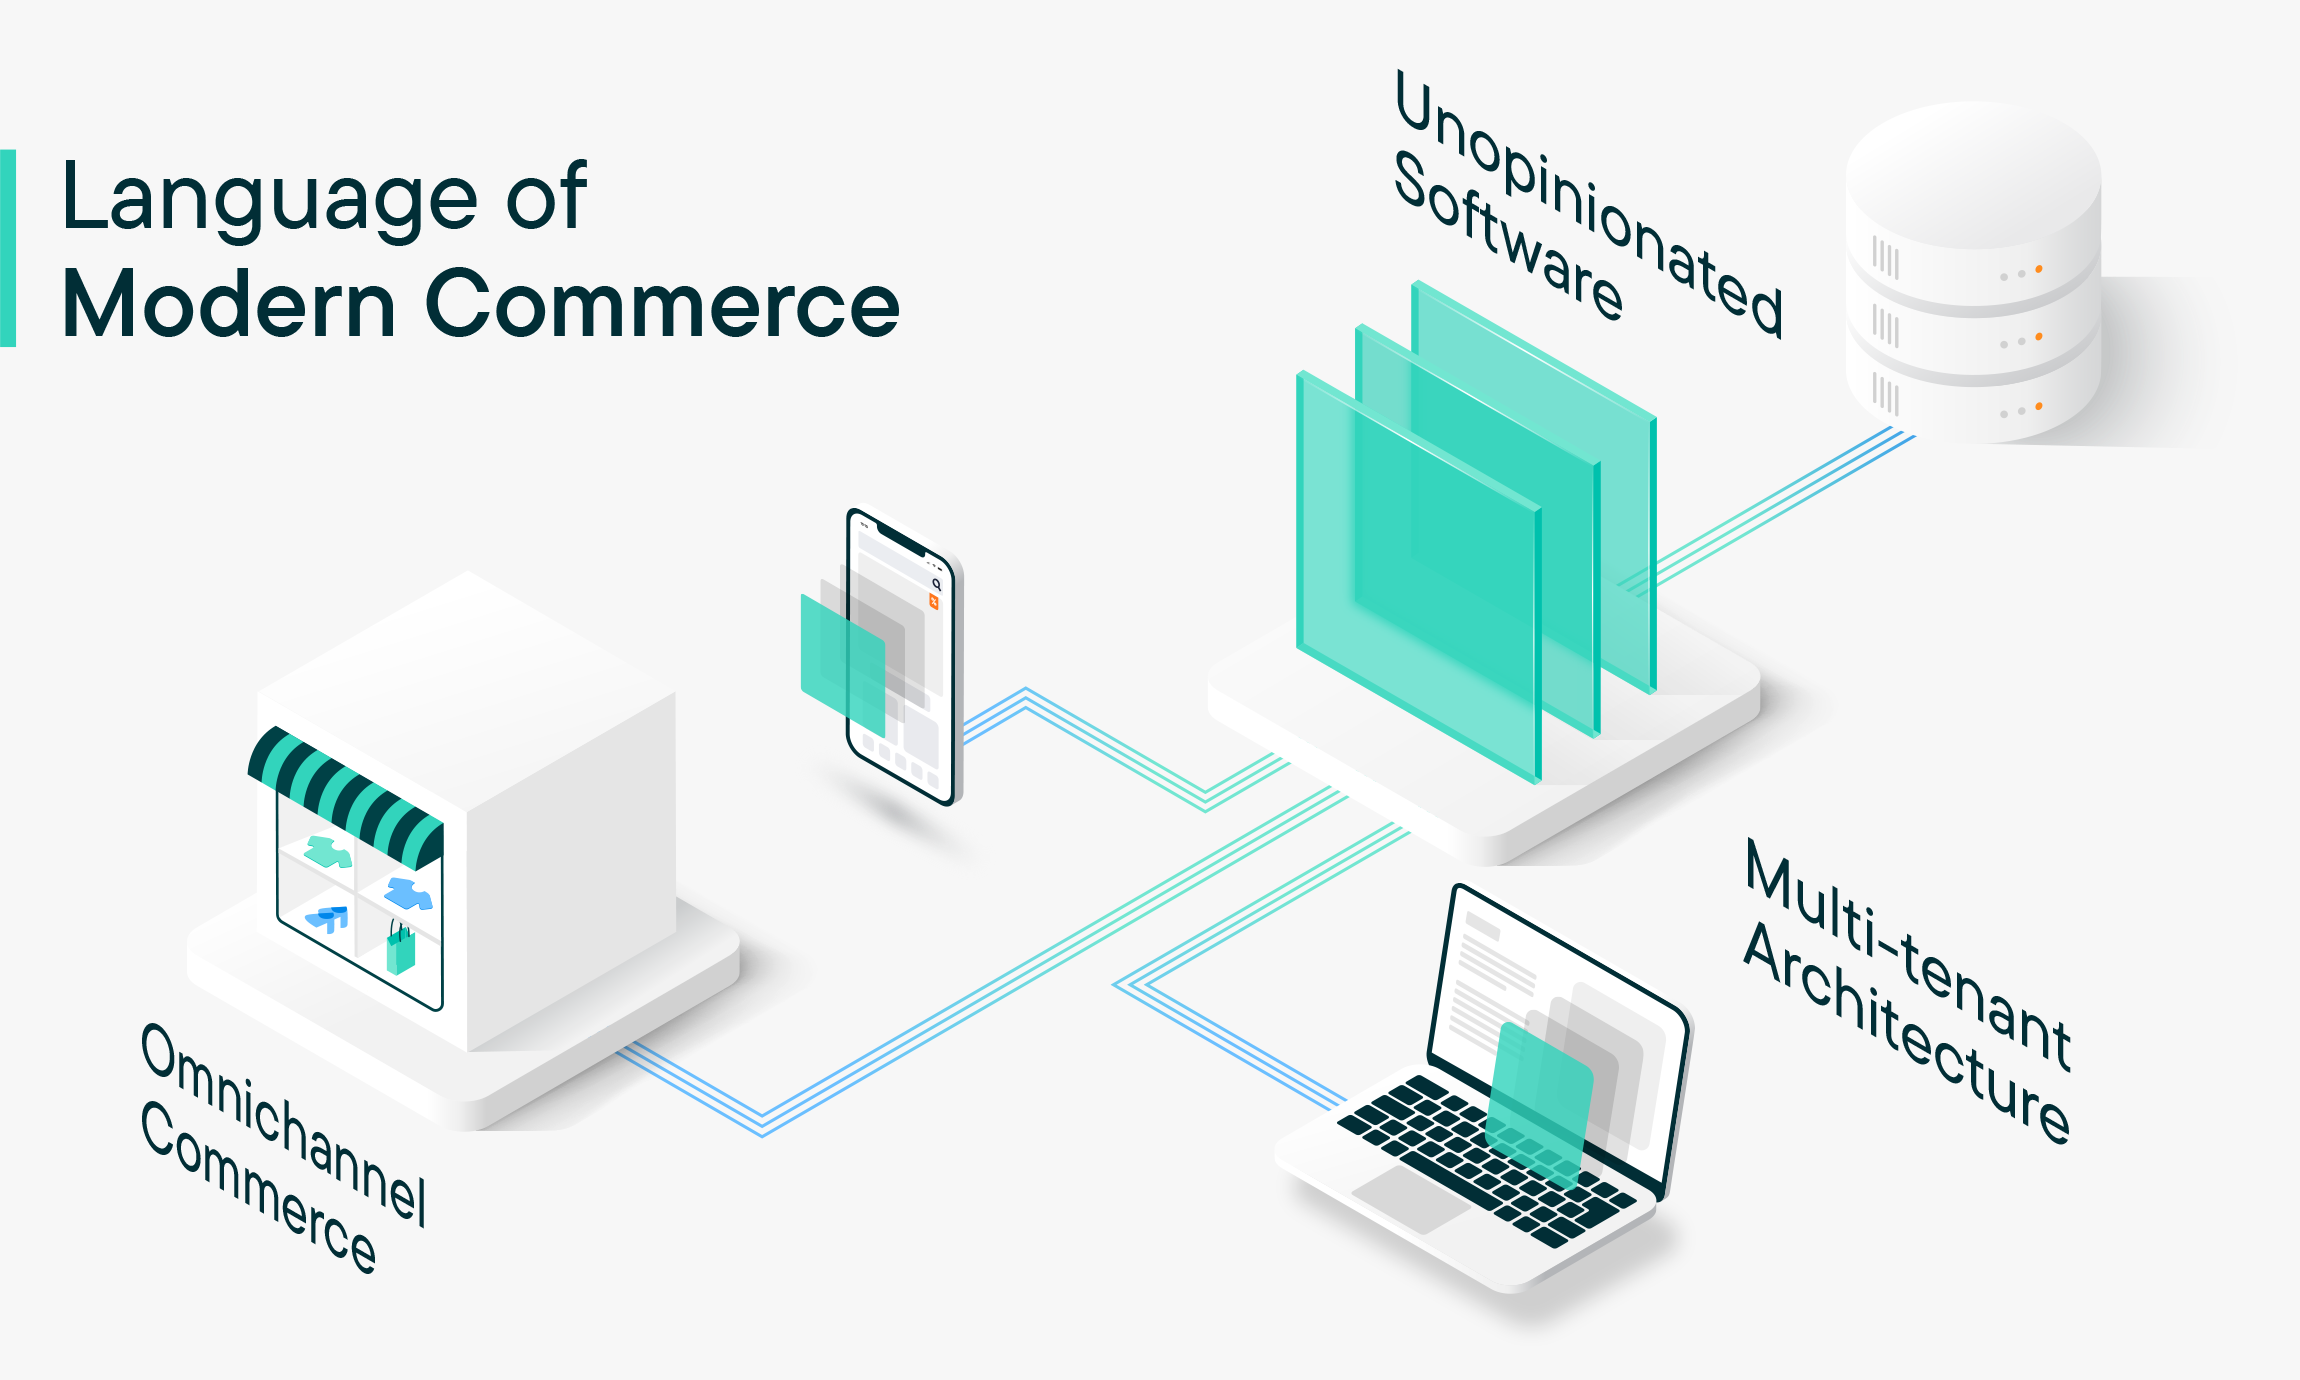 How understanding Multi-tenant architecture, omnichannel commerce, and opinionated/unopinionated software can help you navigate your digital future